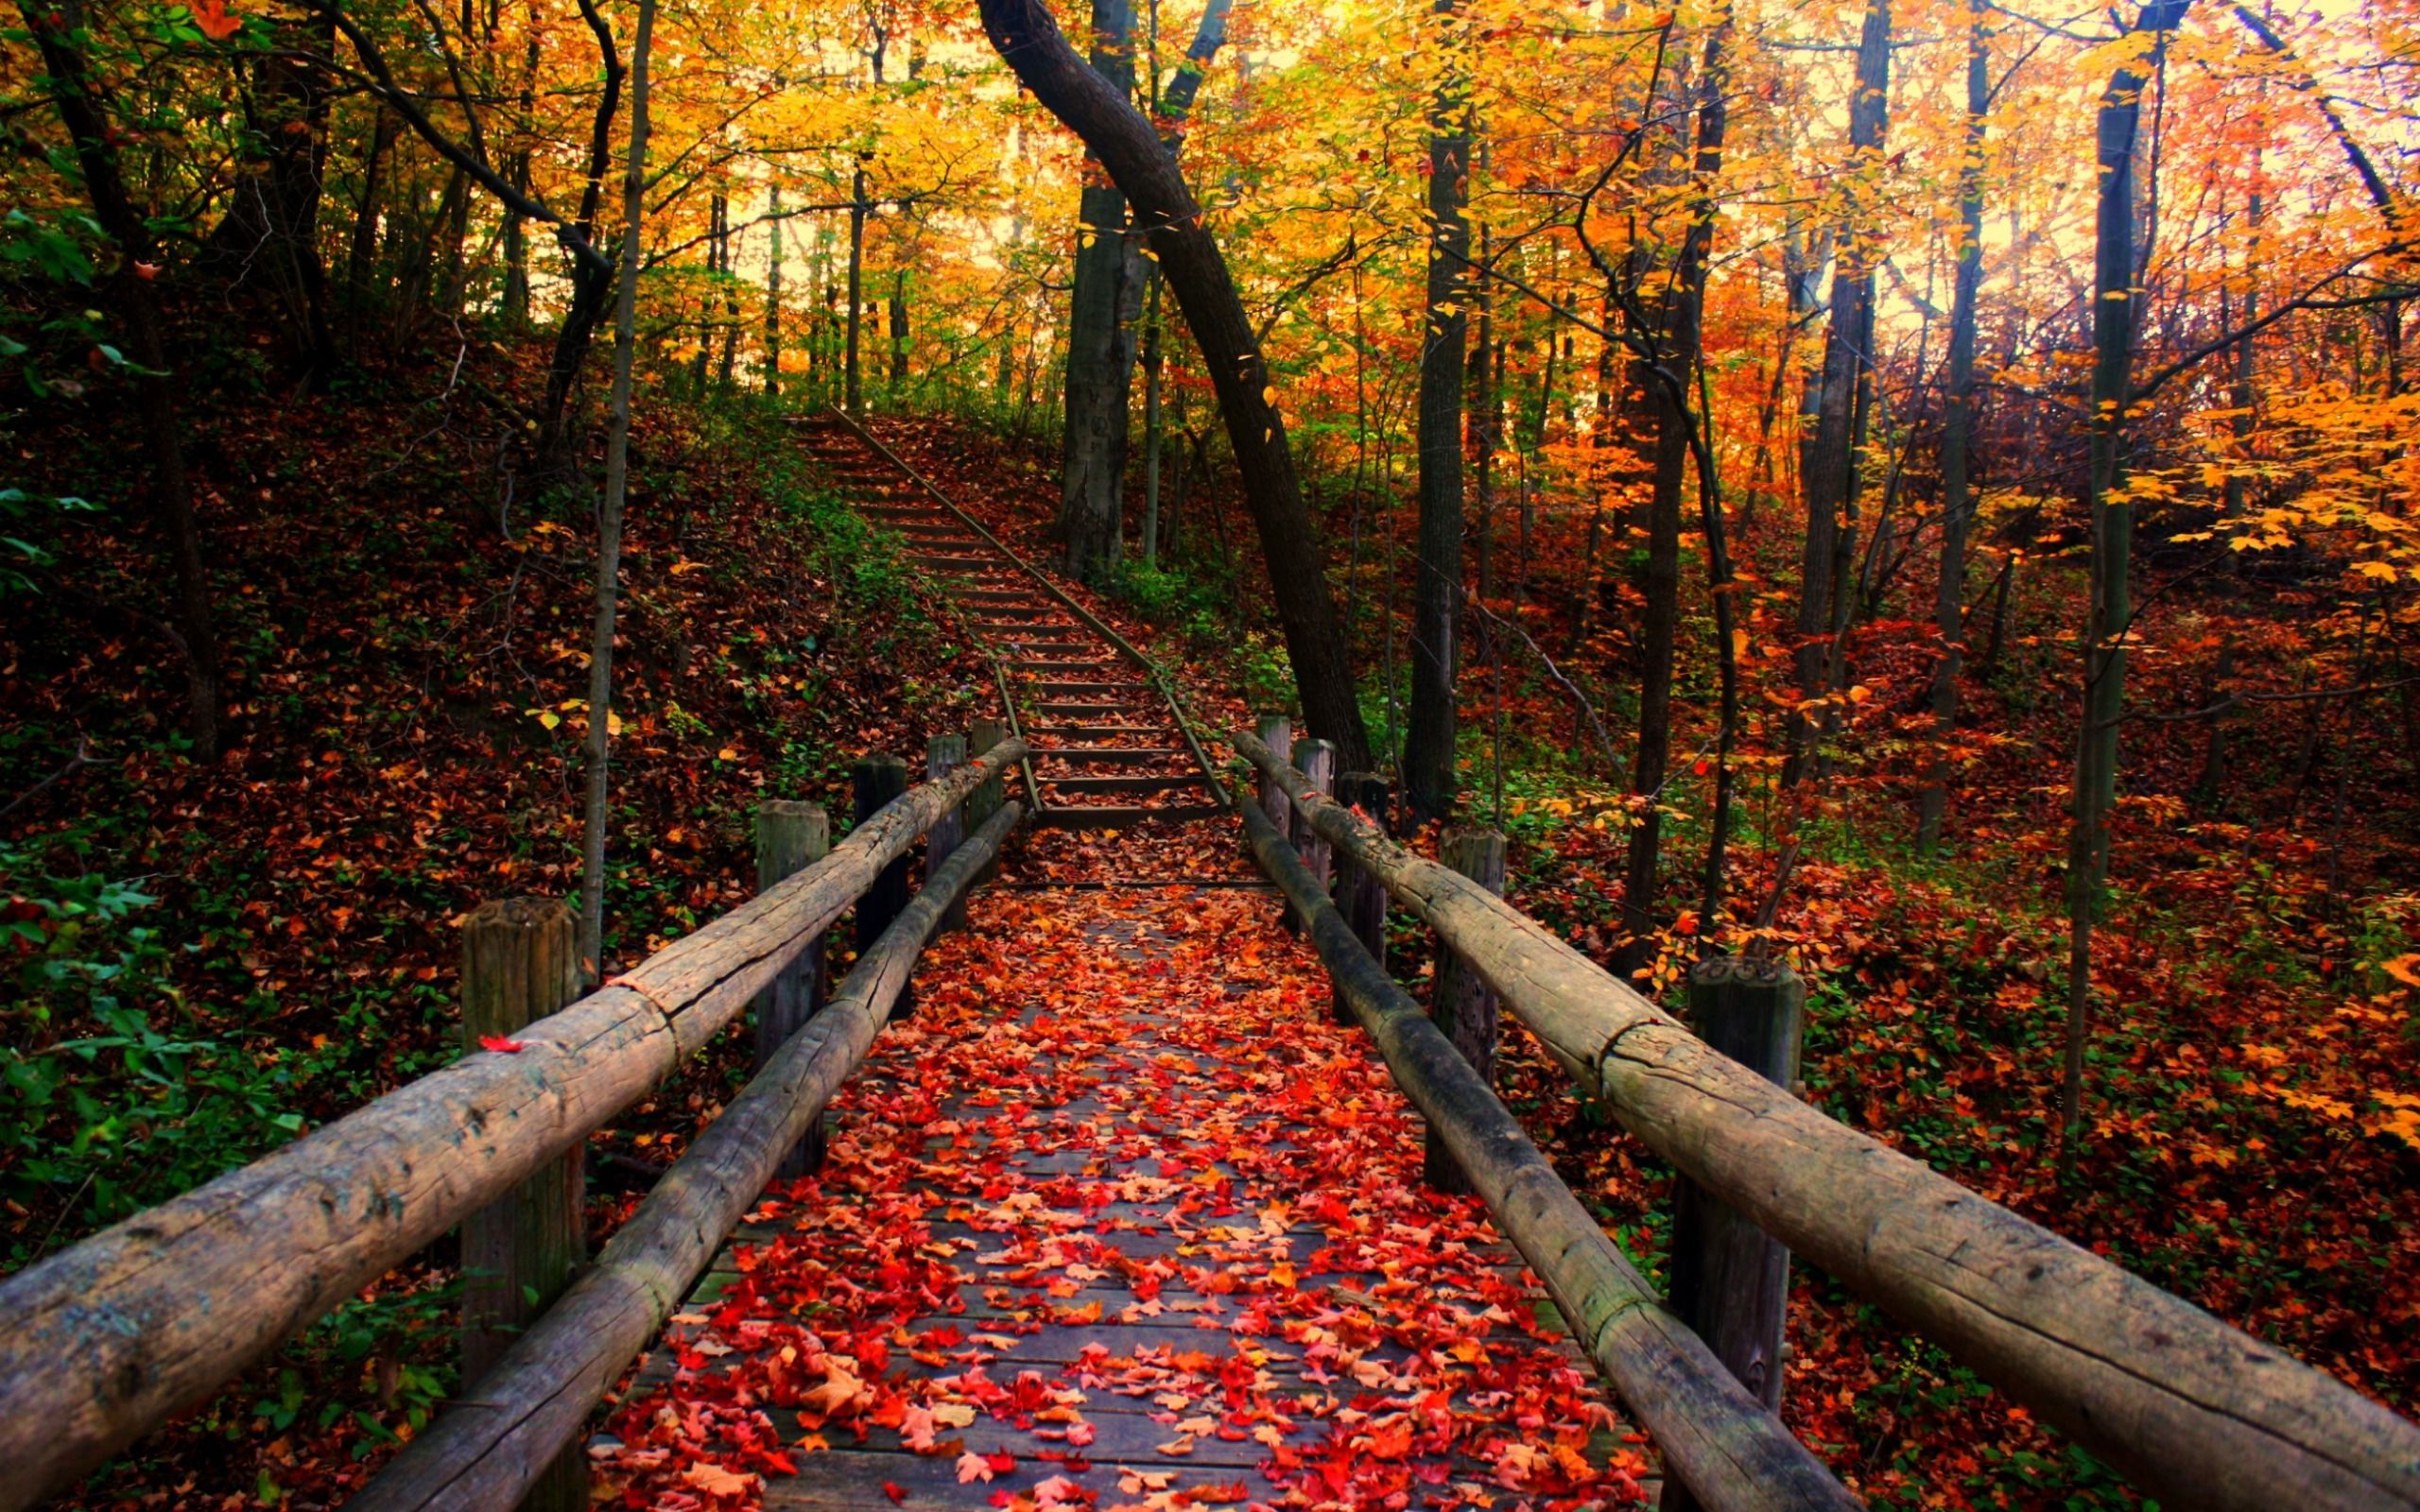 Forest path in autumn wallpaper. Autumn scenery, Autumn scenes, Scenery wallpaper